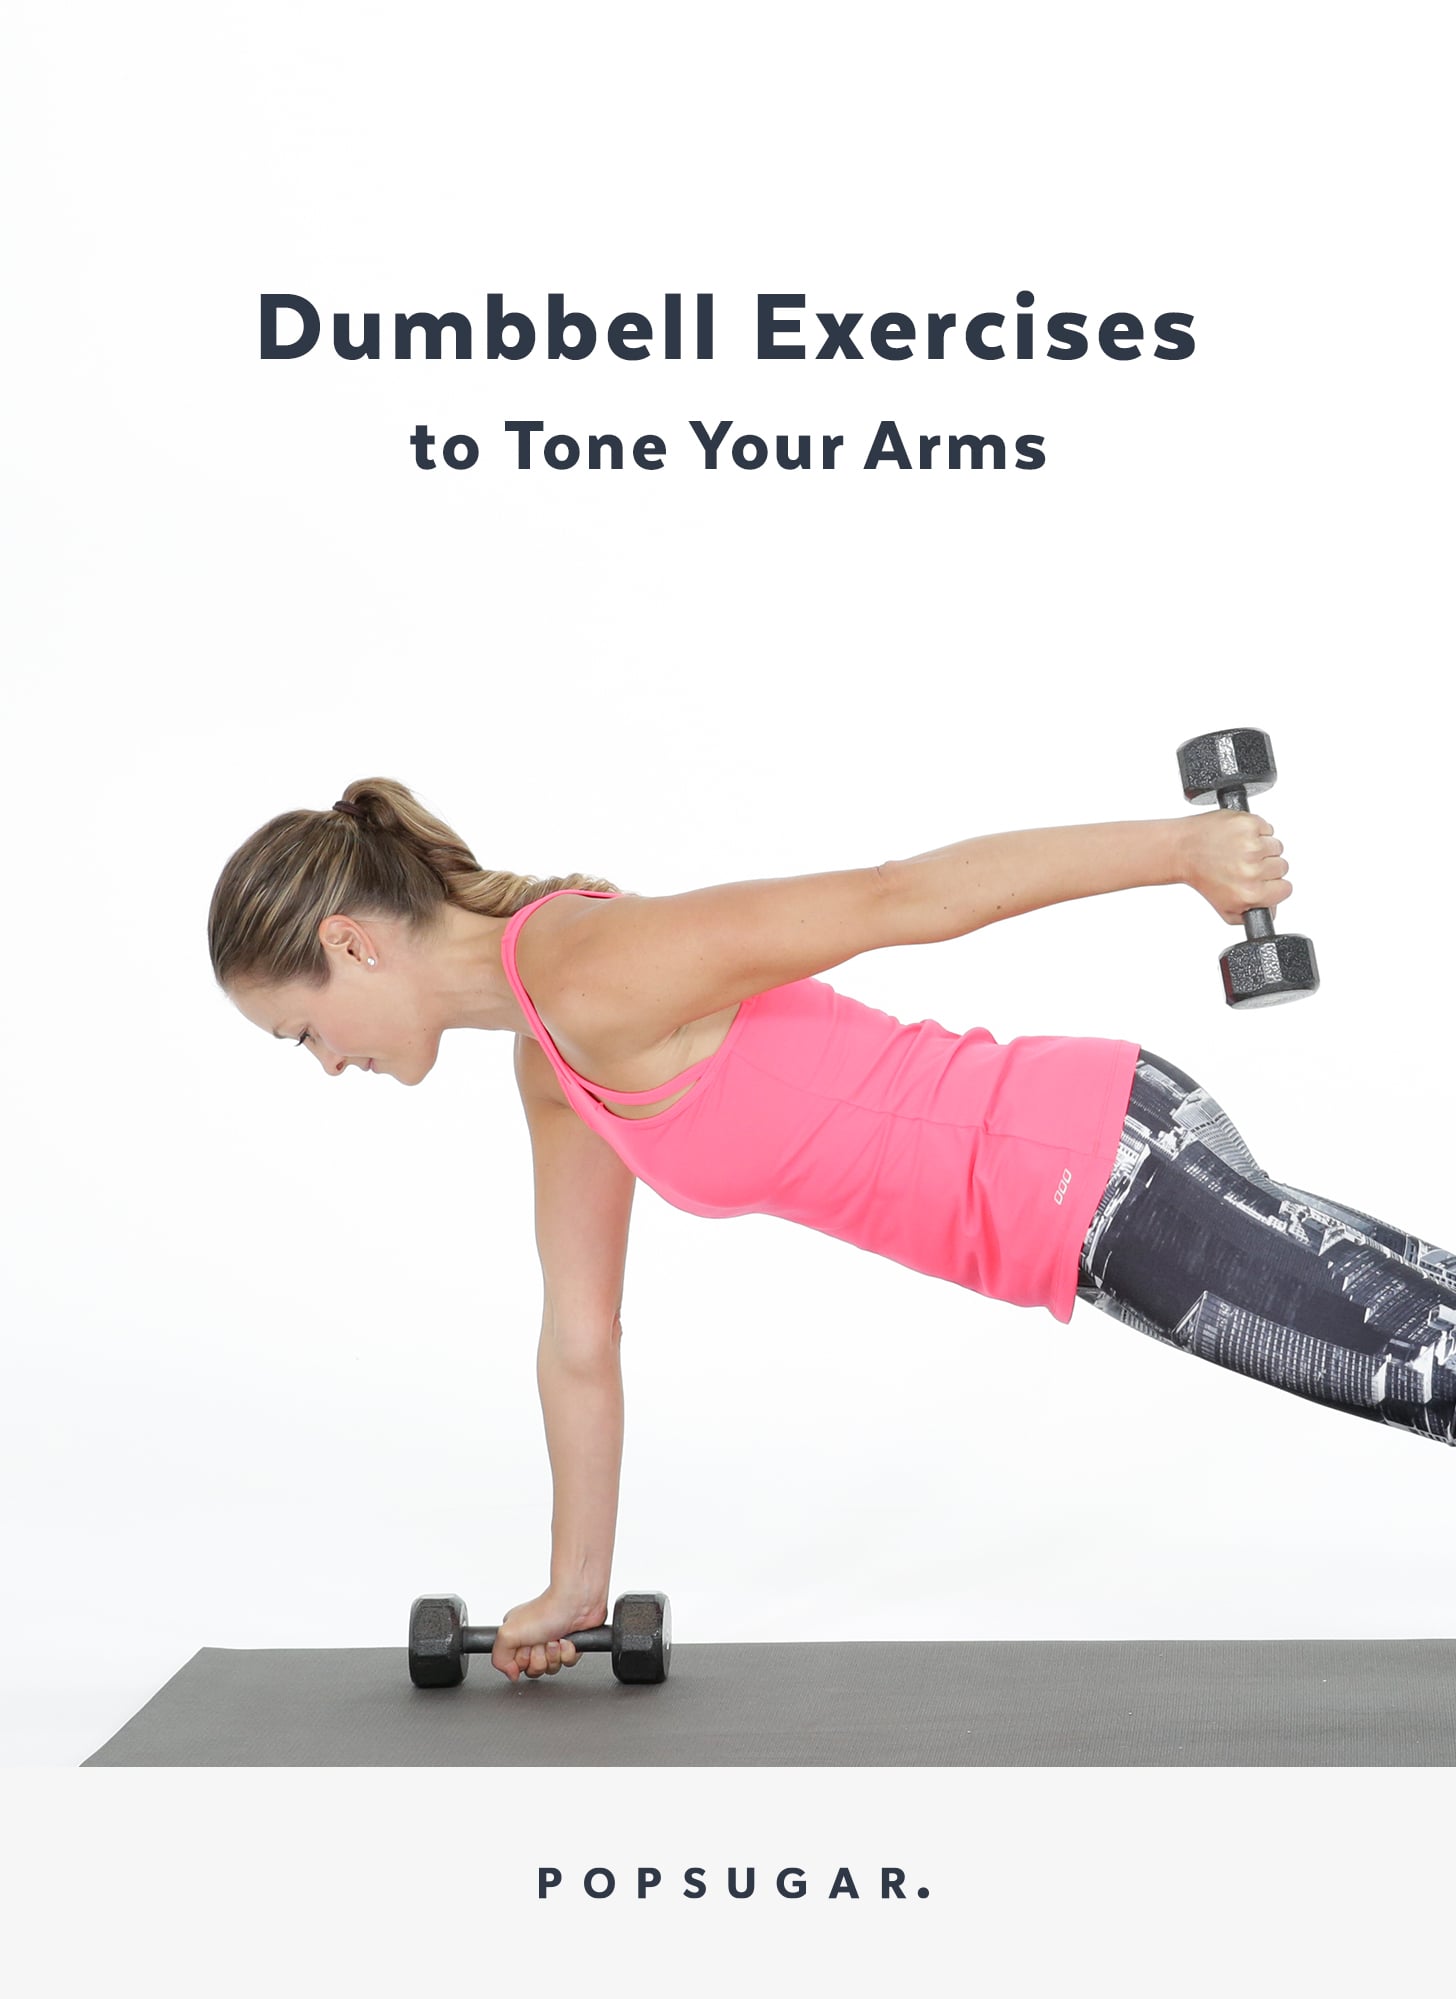 How Do I Work My Arms With Dumbbells?